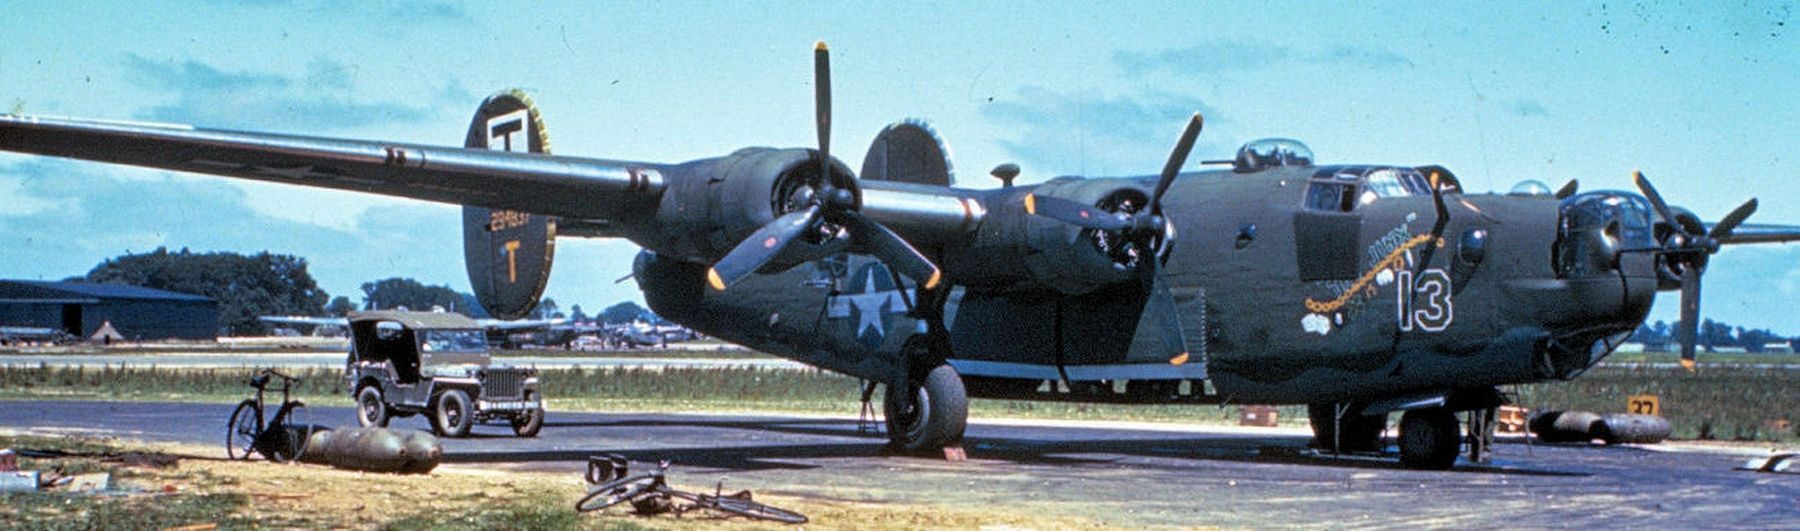 B-24 Liberator of the 490th Bombardment Group image. Click for full size.